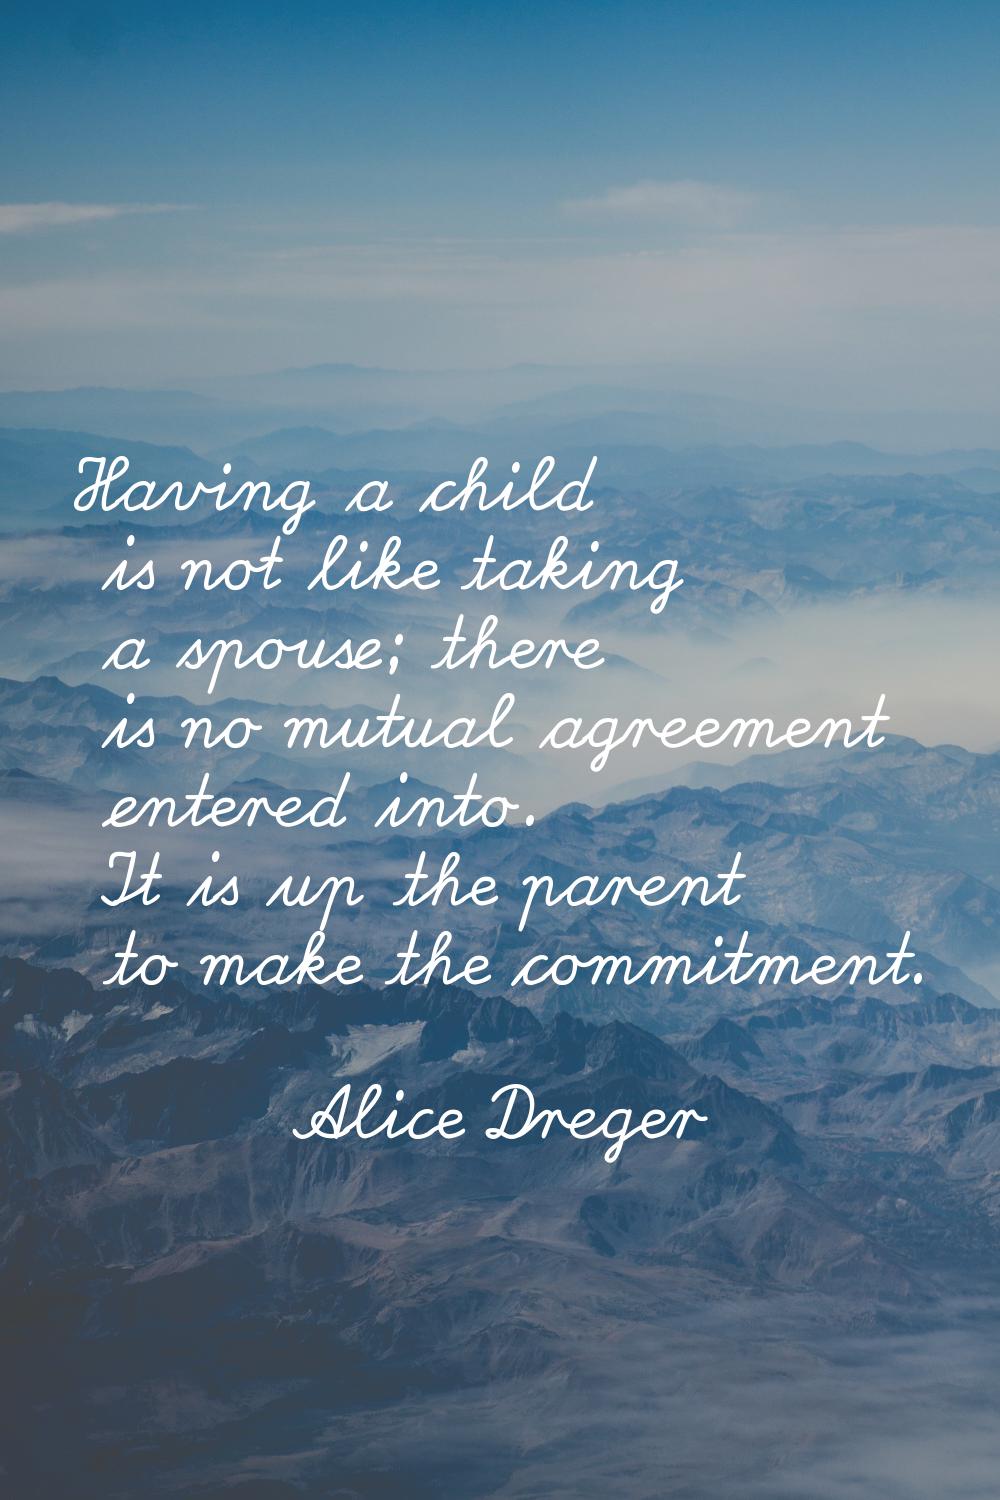 Having a child is not like taking a spouse; there is no mutual agreement entered into. It is up the